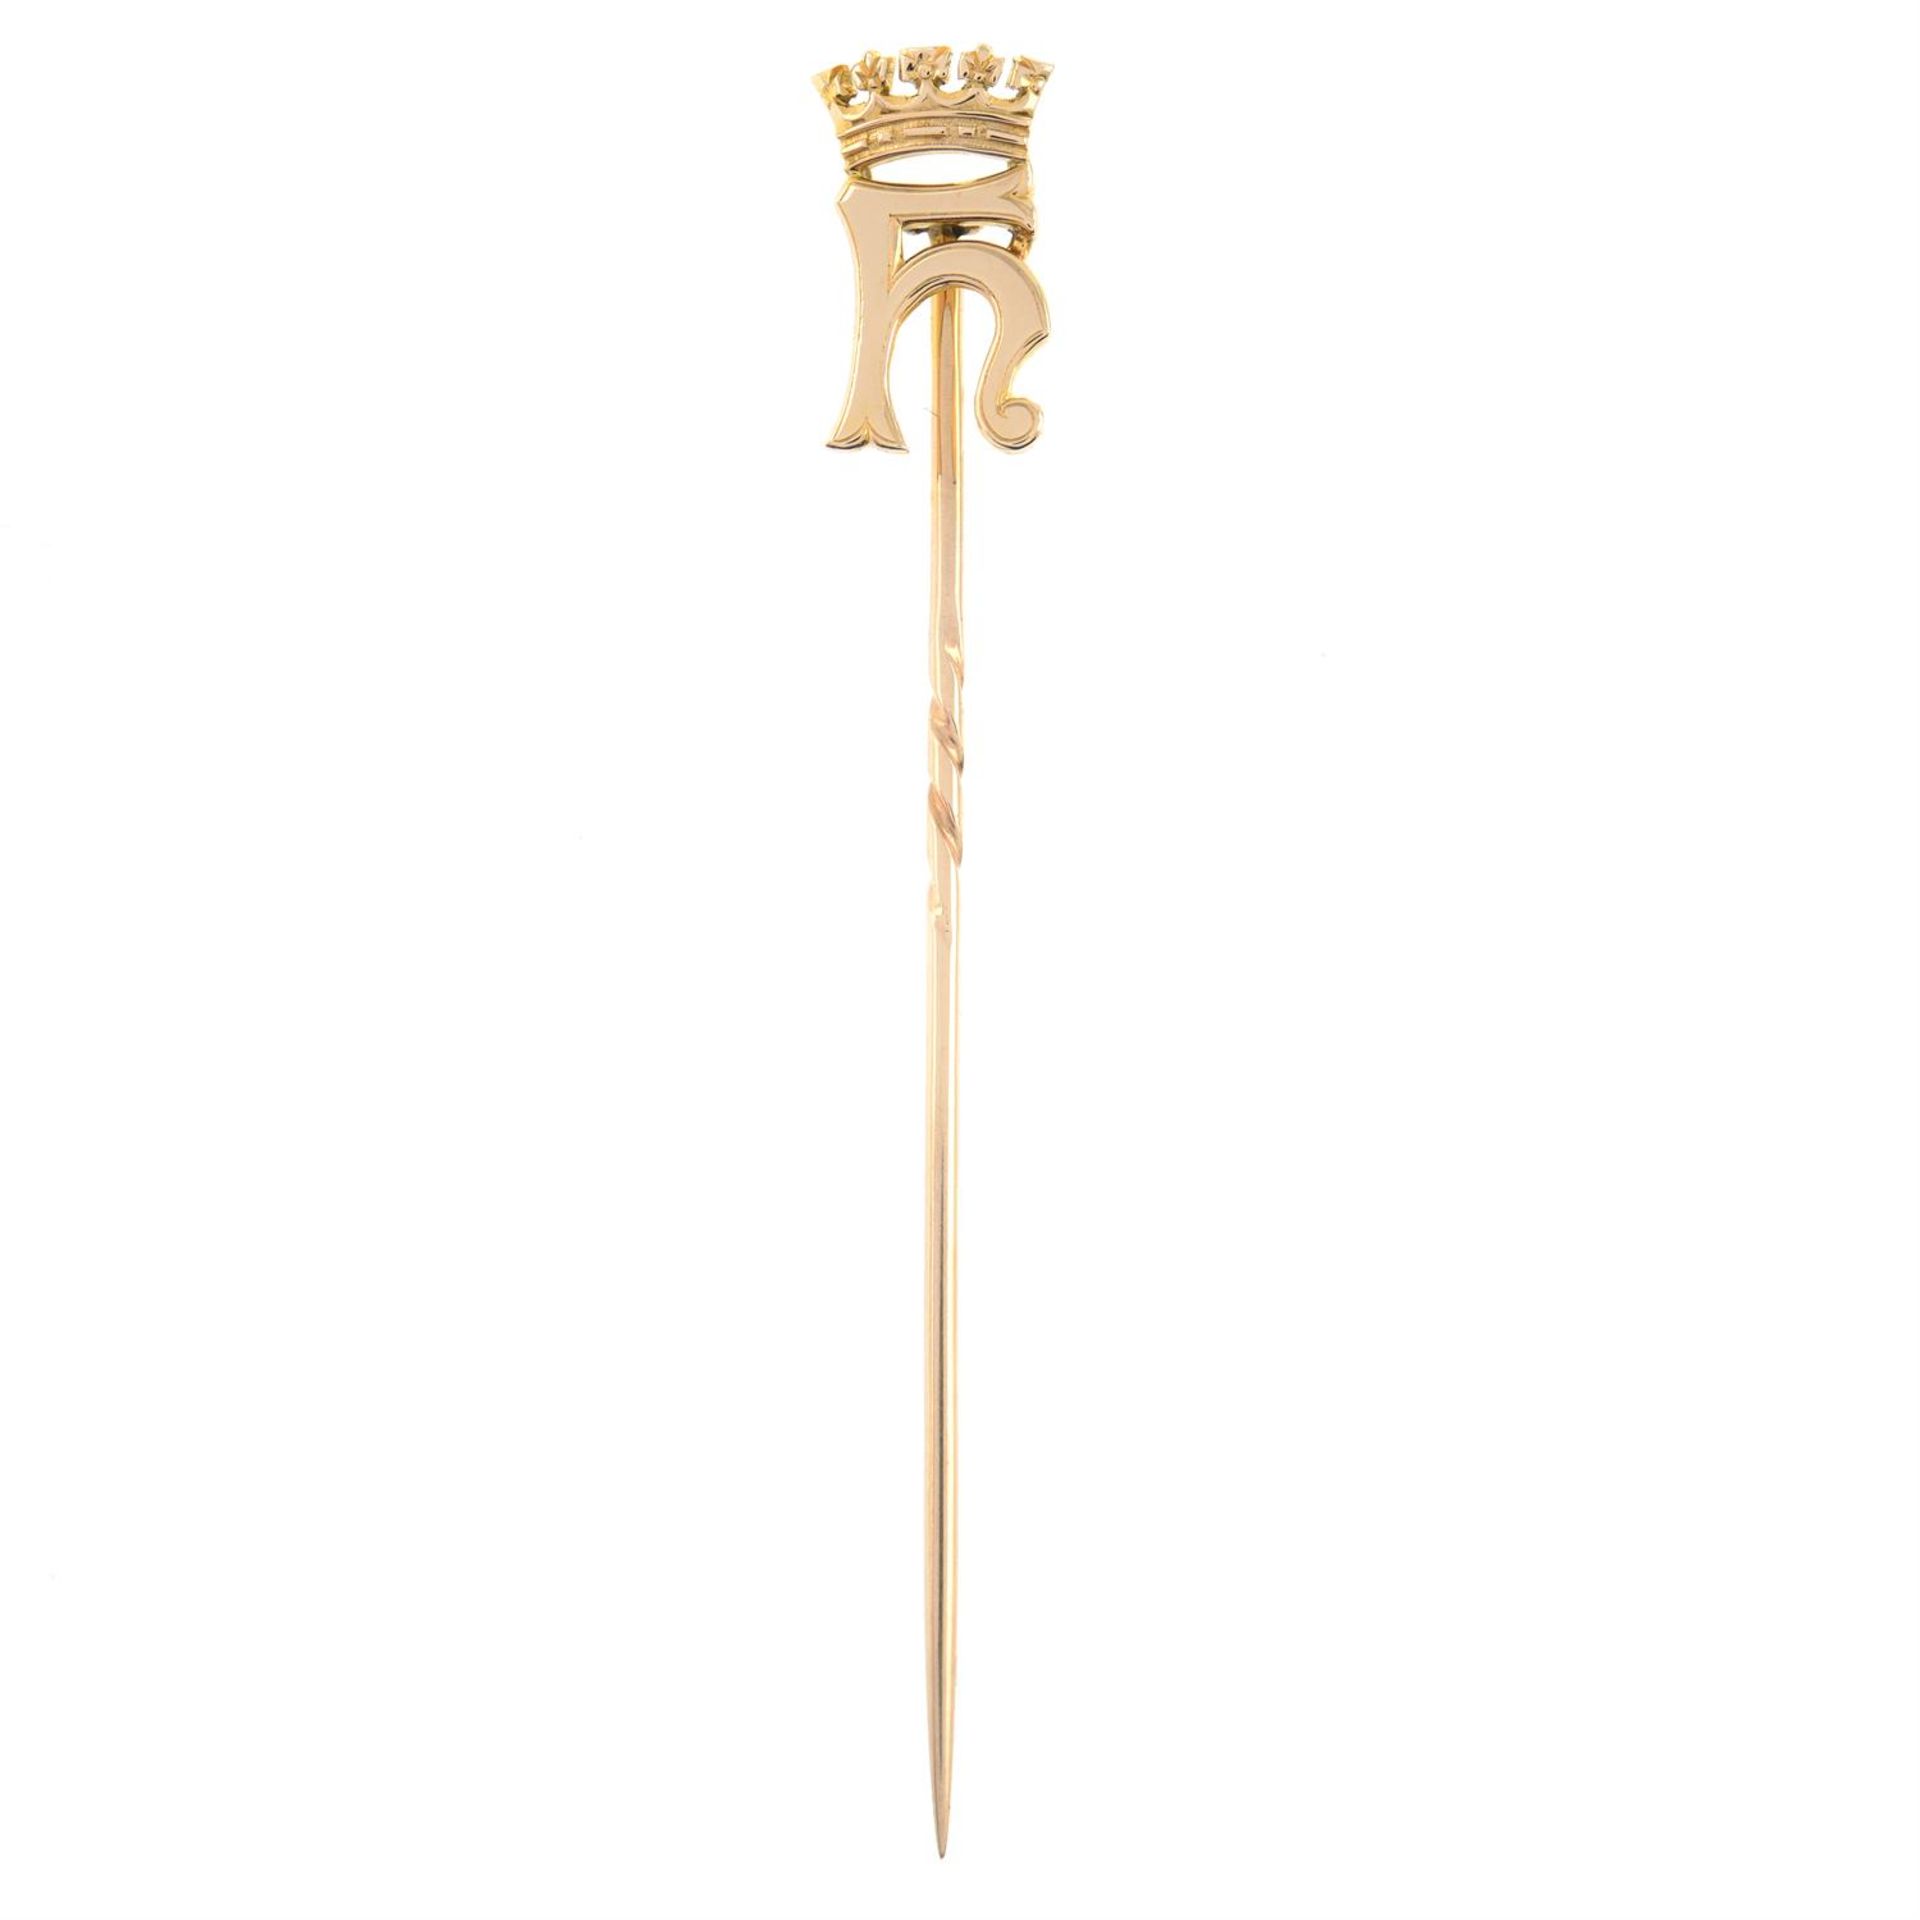 An early 20th century 15ct gold monogram stickpin for Princess Helen of Waldeck and Pyrmont, - Image 2 of 7